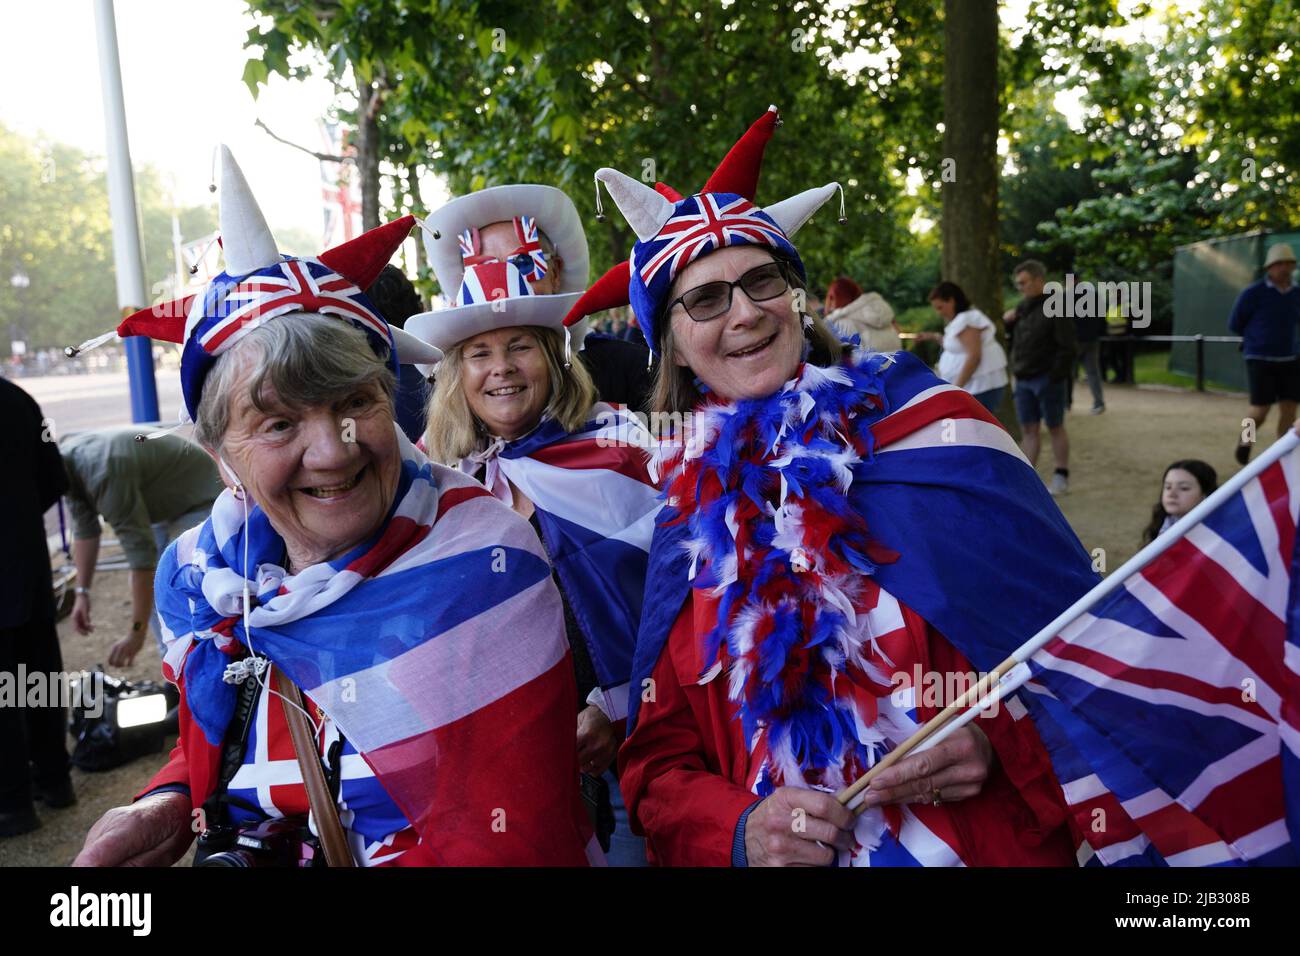 London, UK. 2nd June, 2022. People celebrating The Queen's Platinum Jubilee in The Mall Before The Queen's Birthday Parade. Credit: Grant Rooney/Alamy Live News Stock Photo